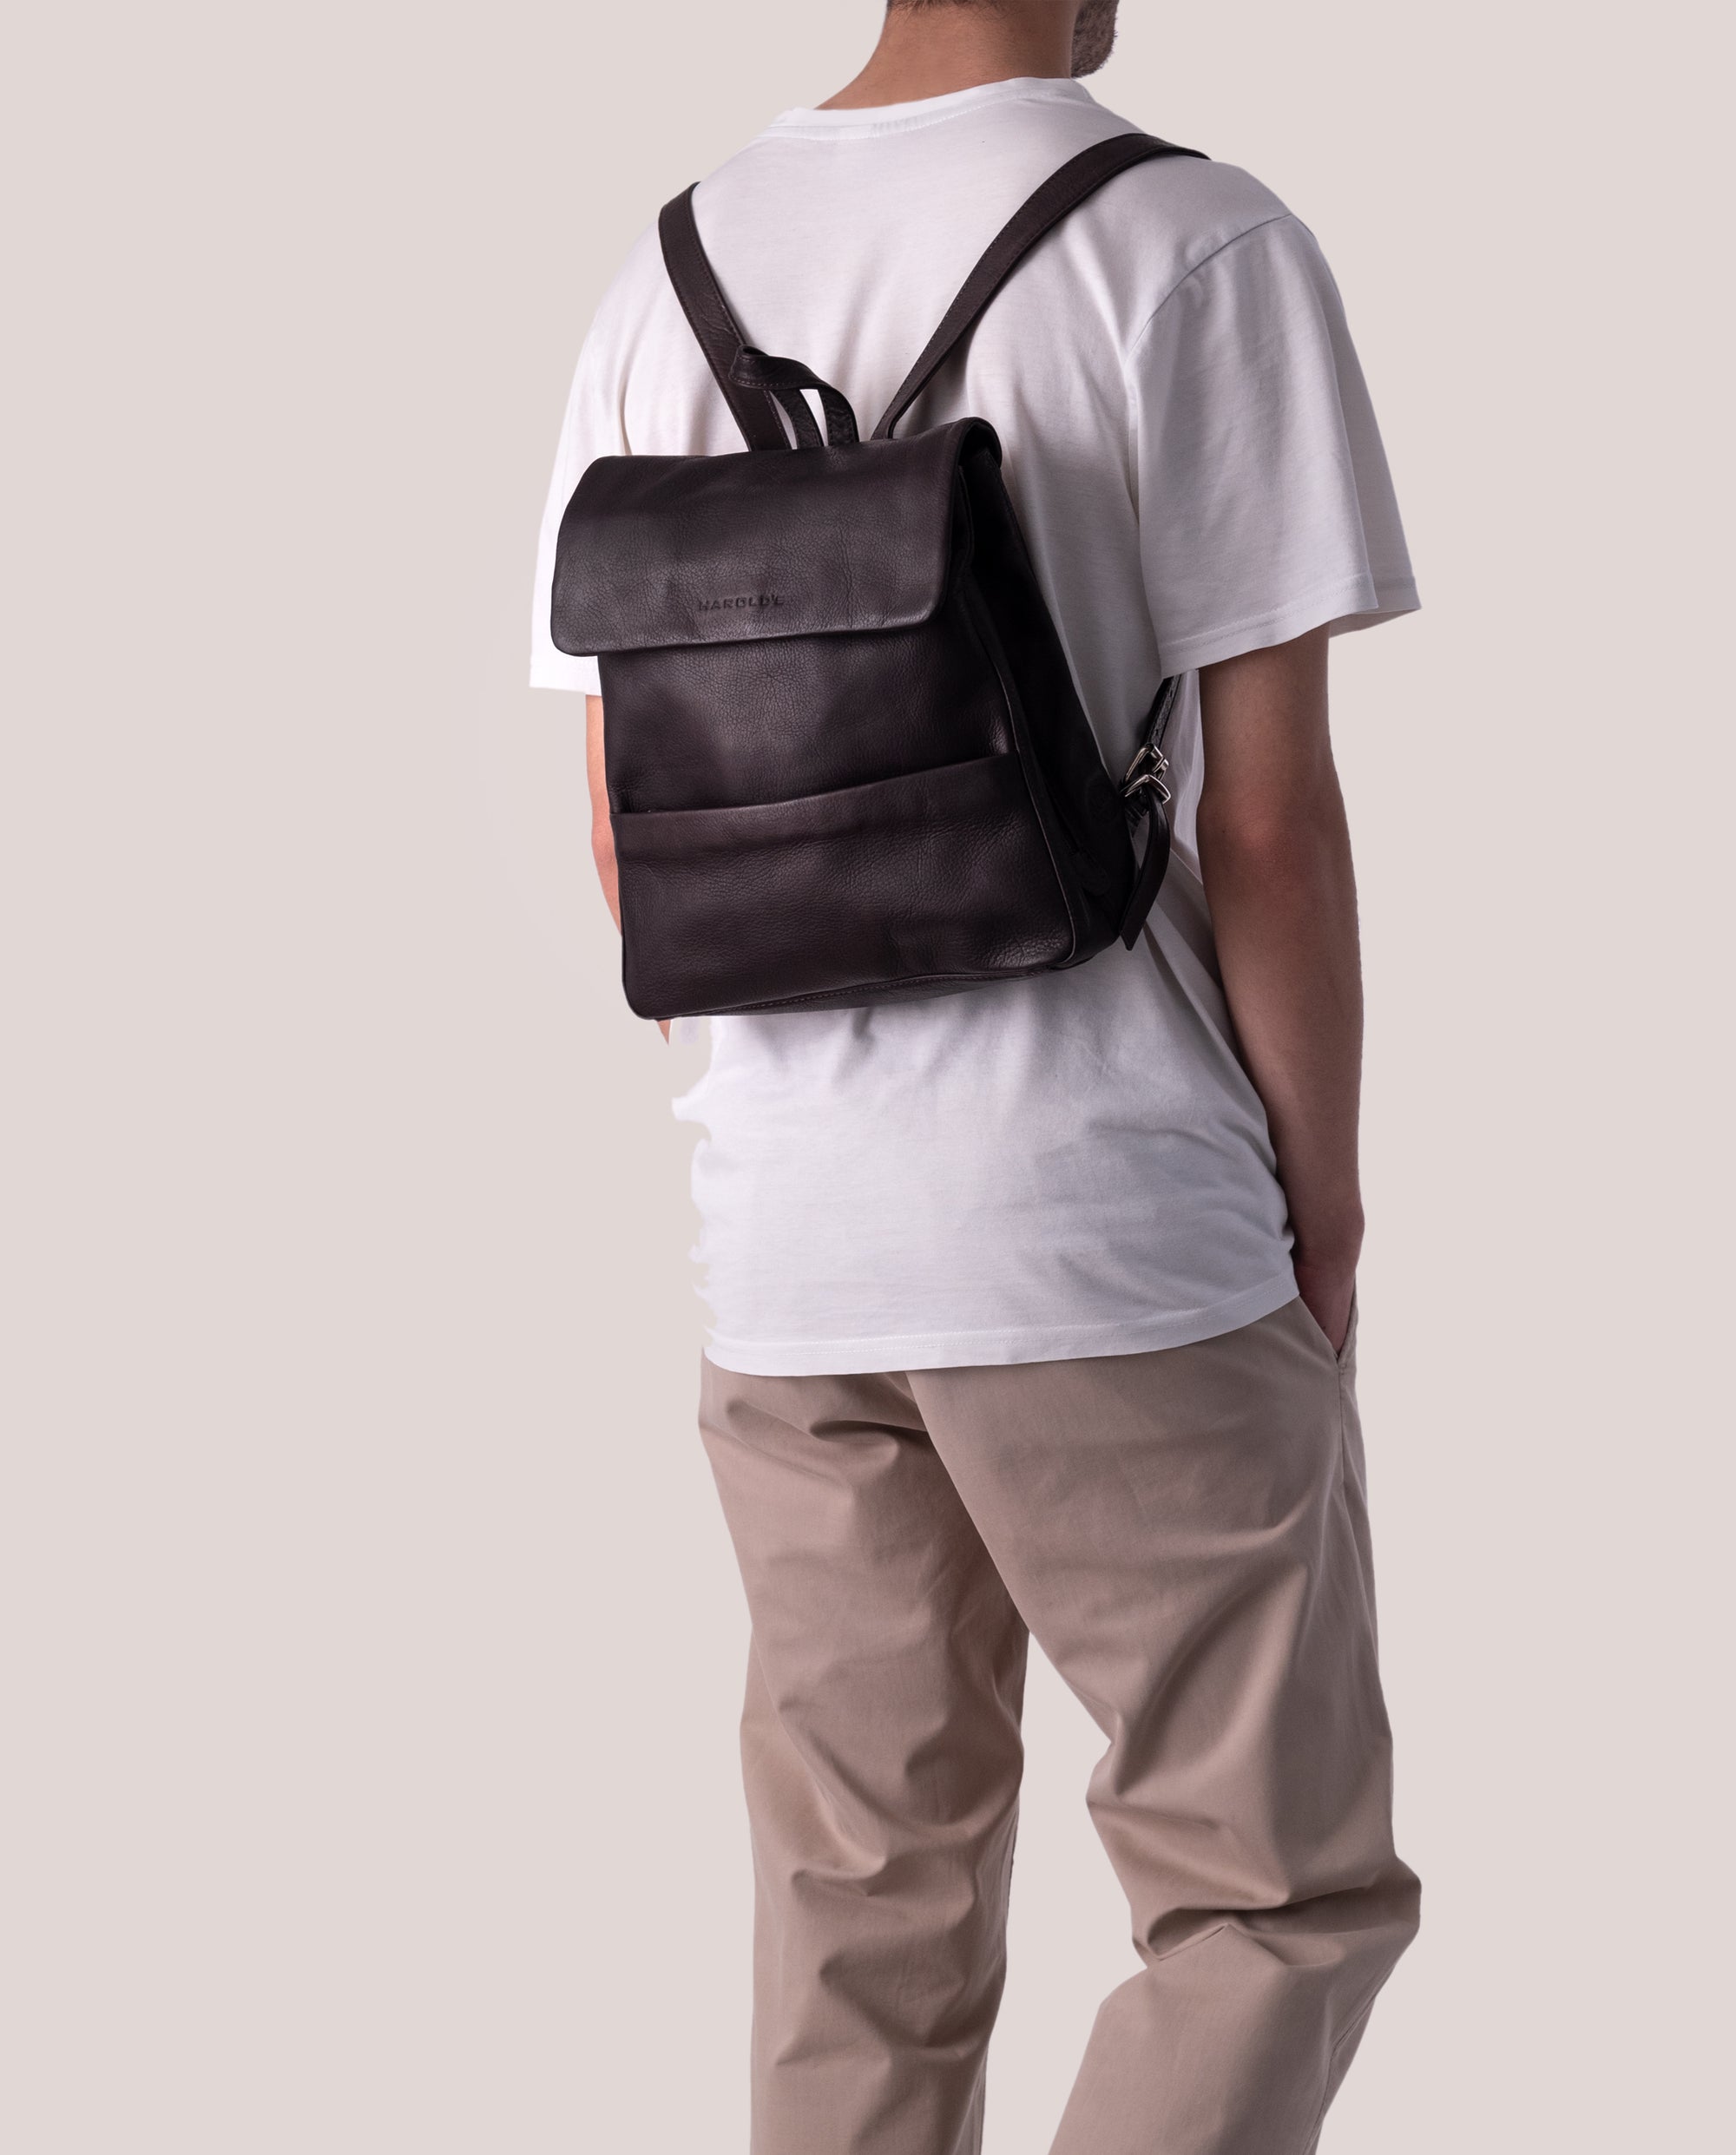 Country City backpack